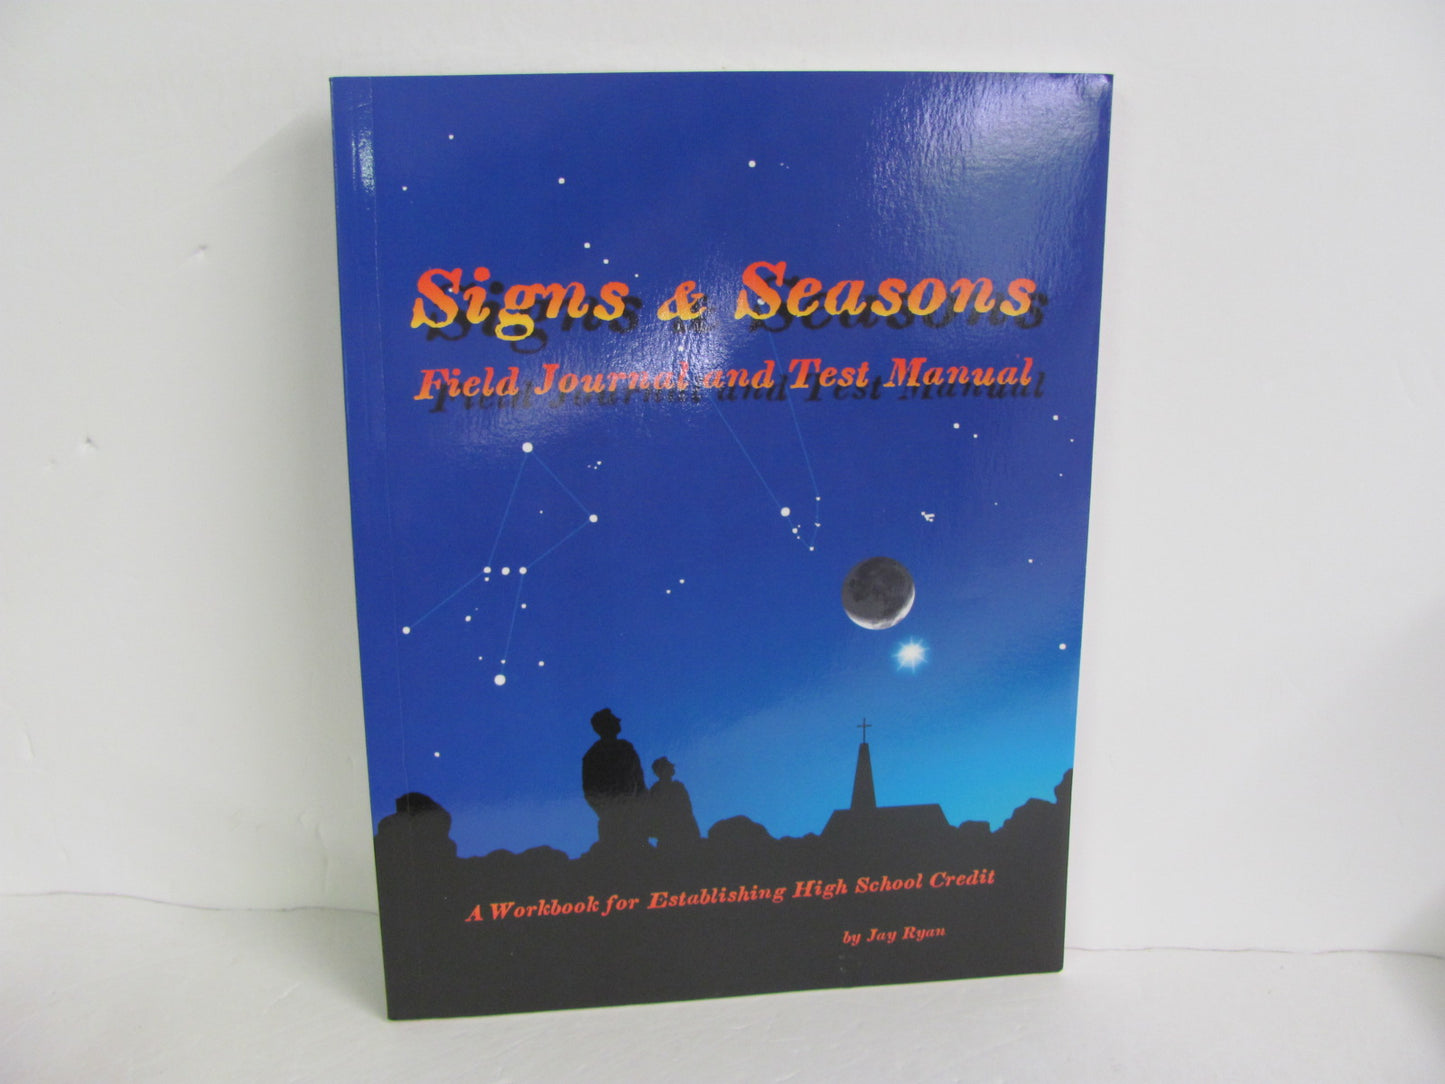 Signs & Seasons Fourth Day Press Journal  Pre-Owned Ryan Space/Astronomy Books